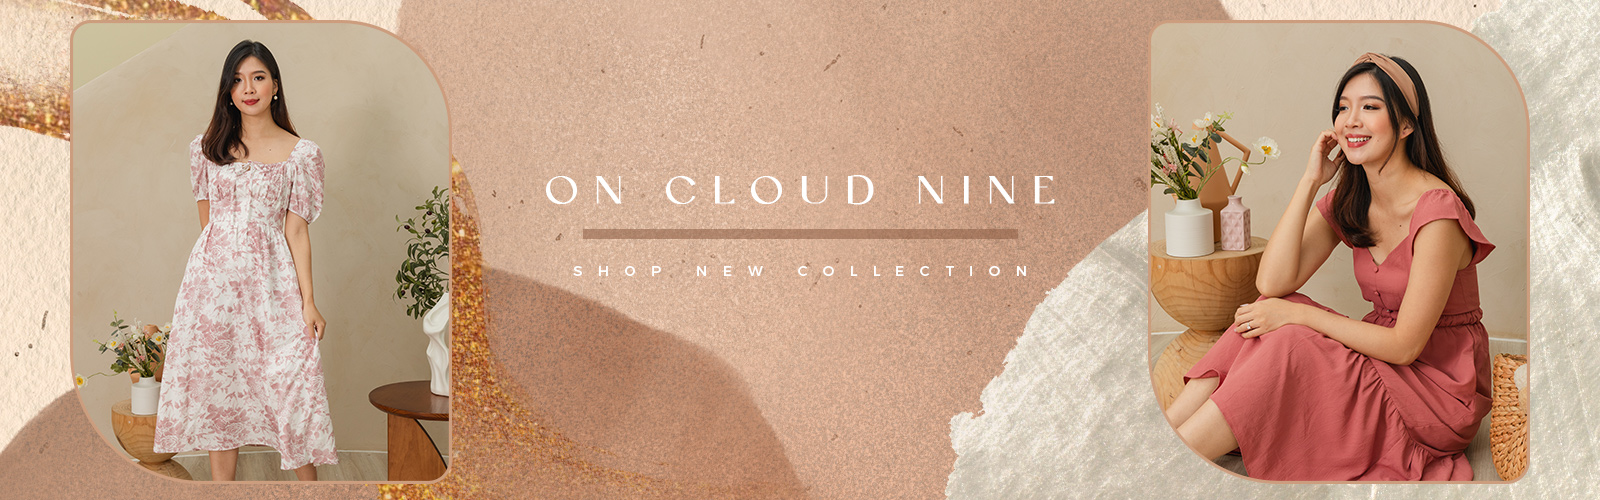 On Cloud Nine Collection